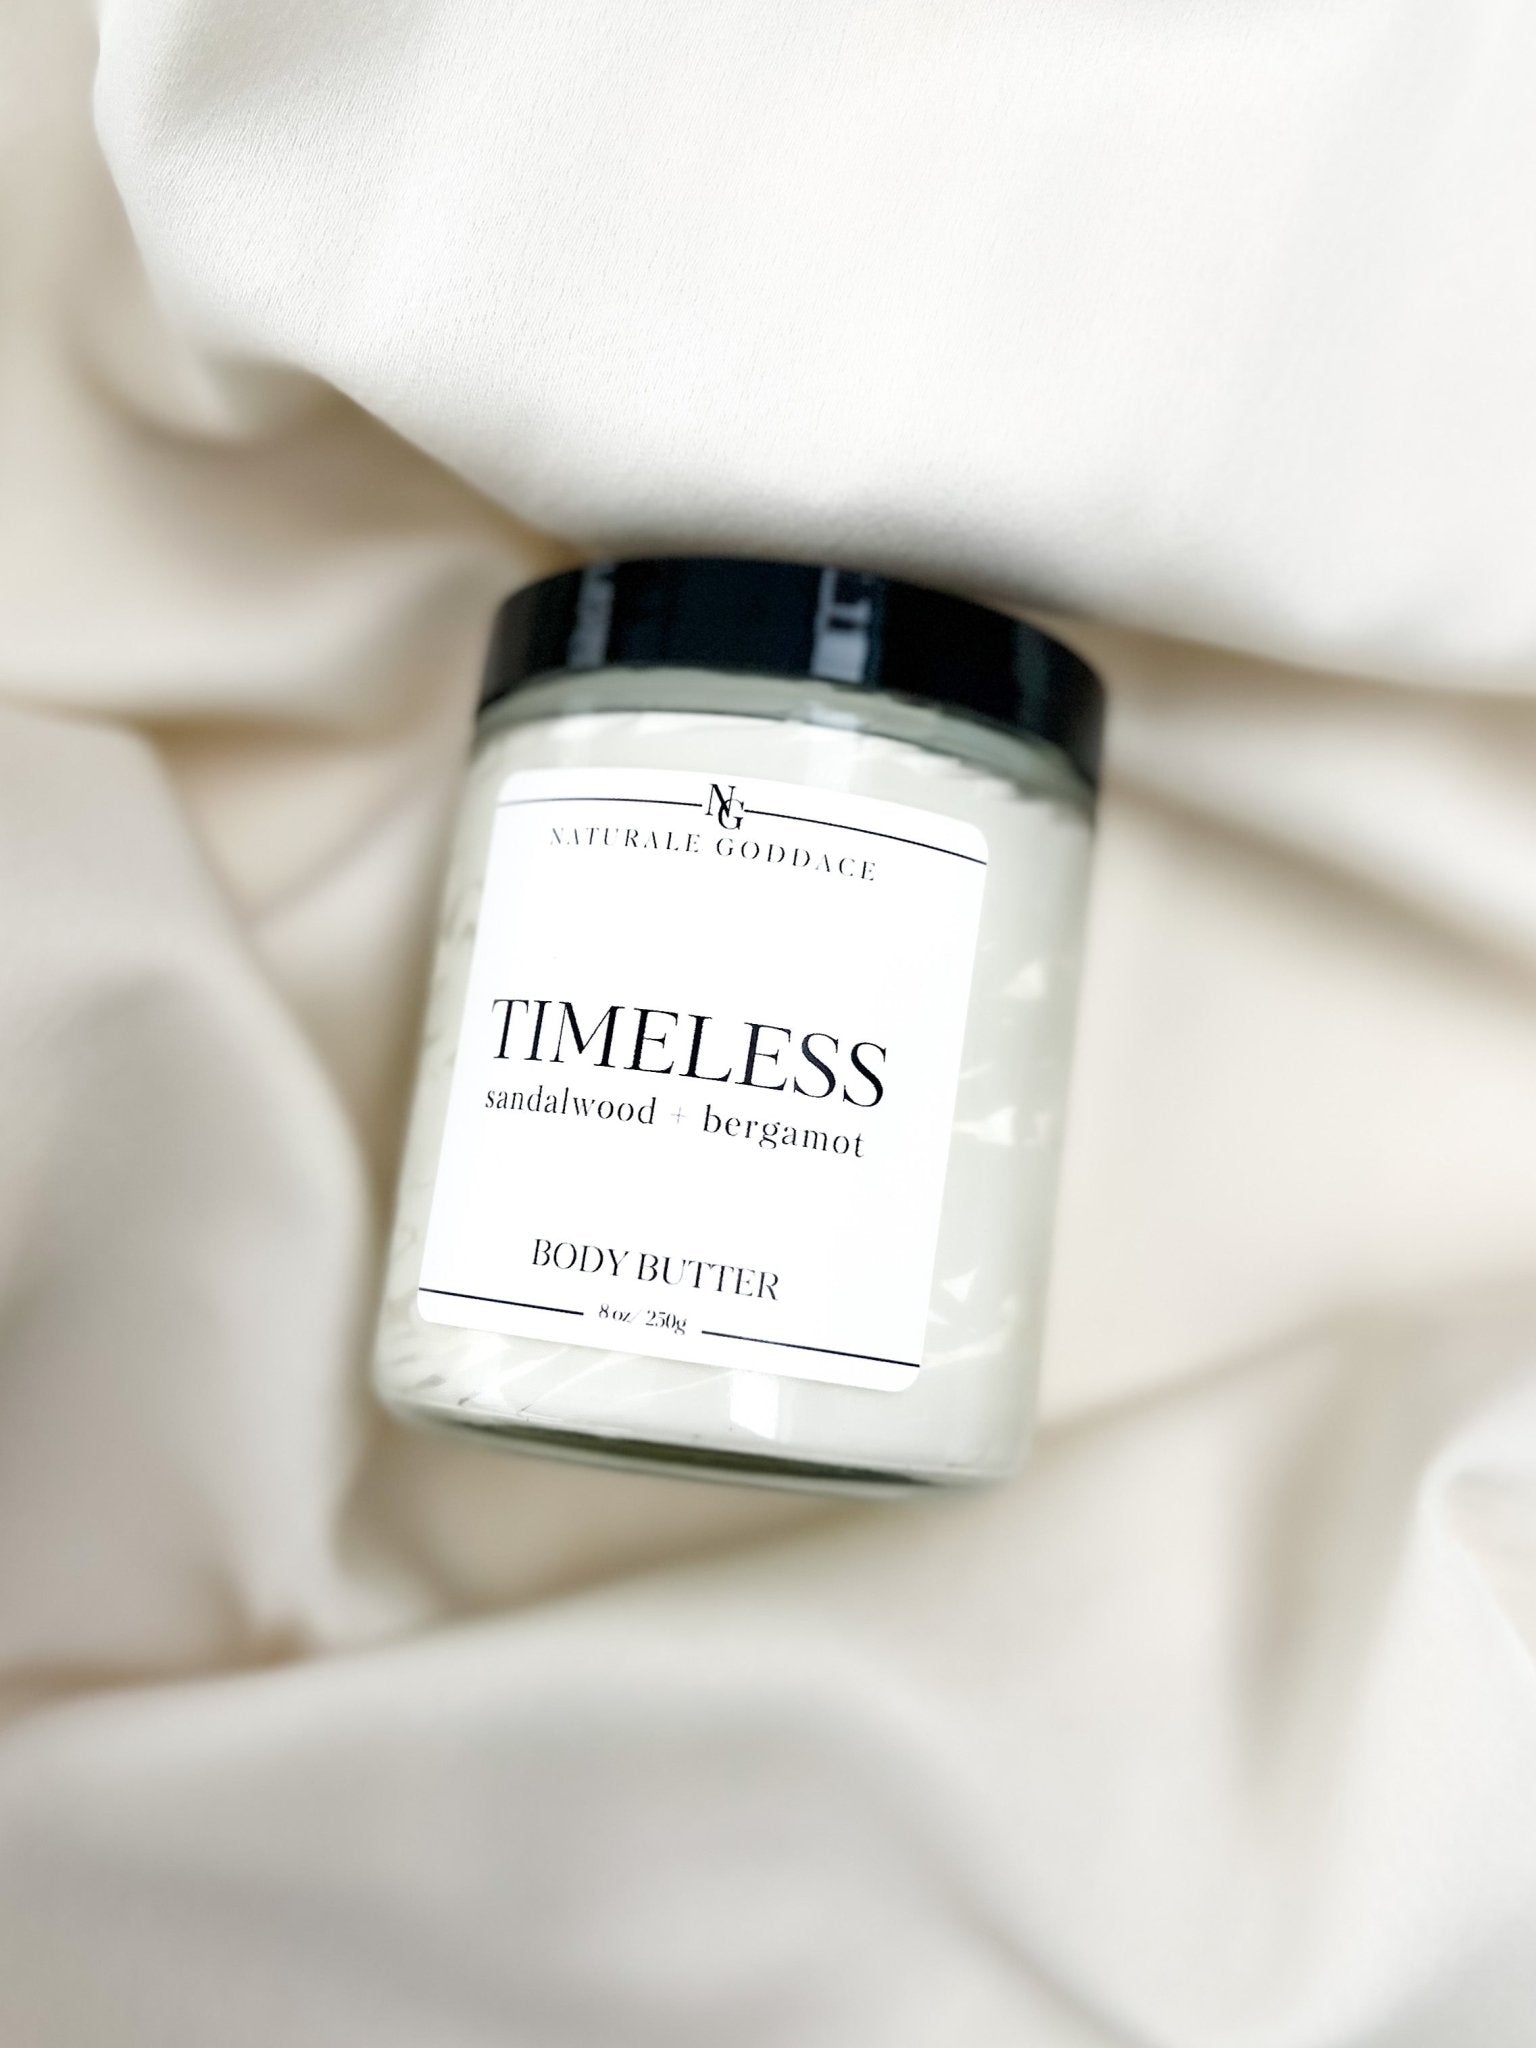 Timeless Body Butter - Naturale Goddace-Whipped Body Butter